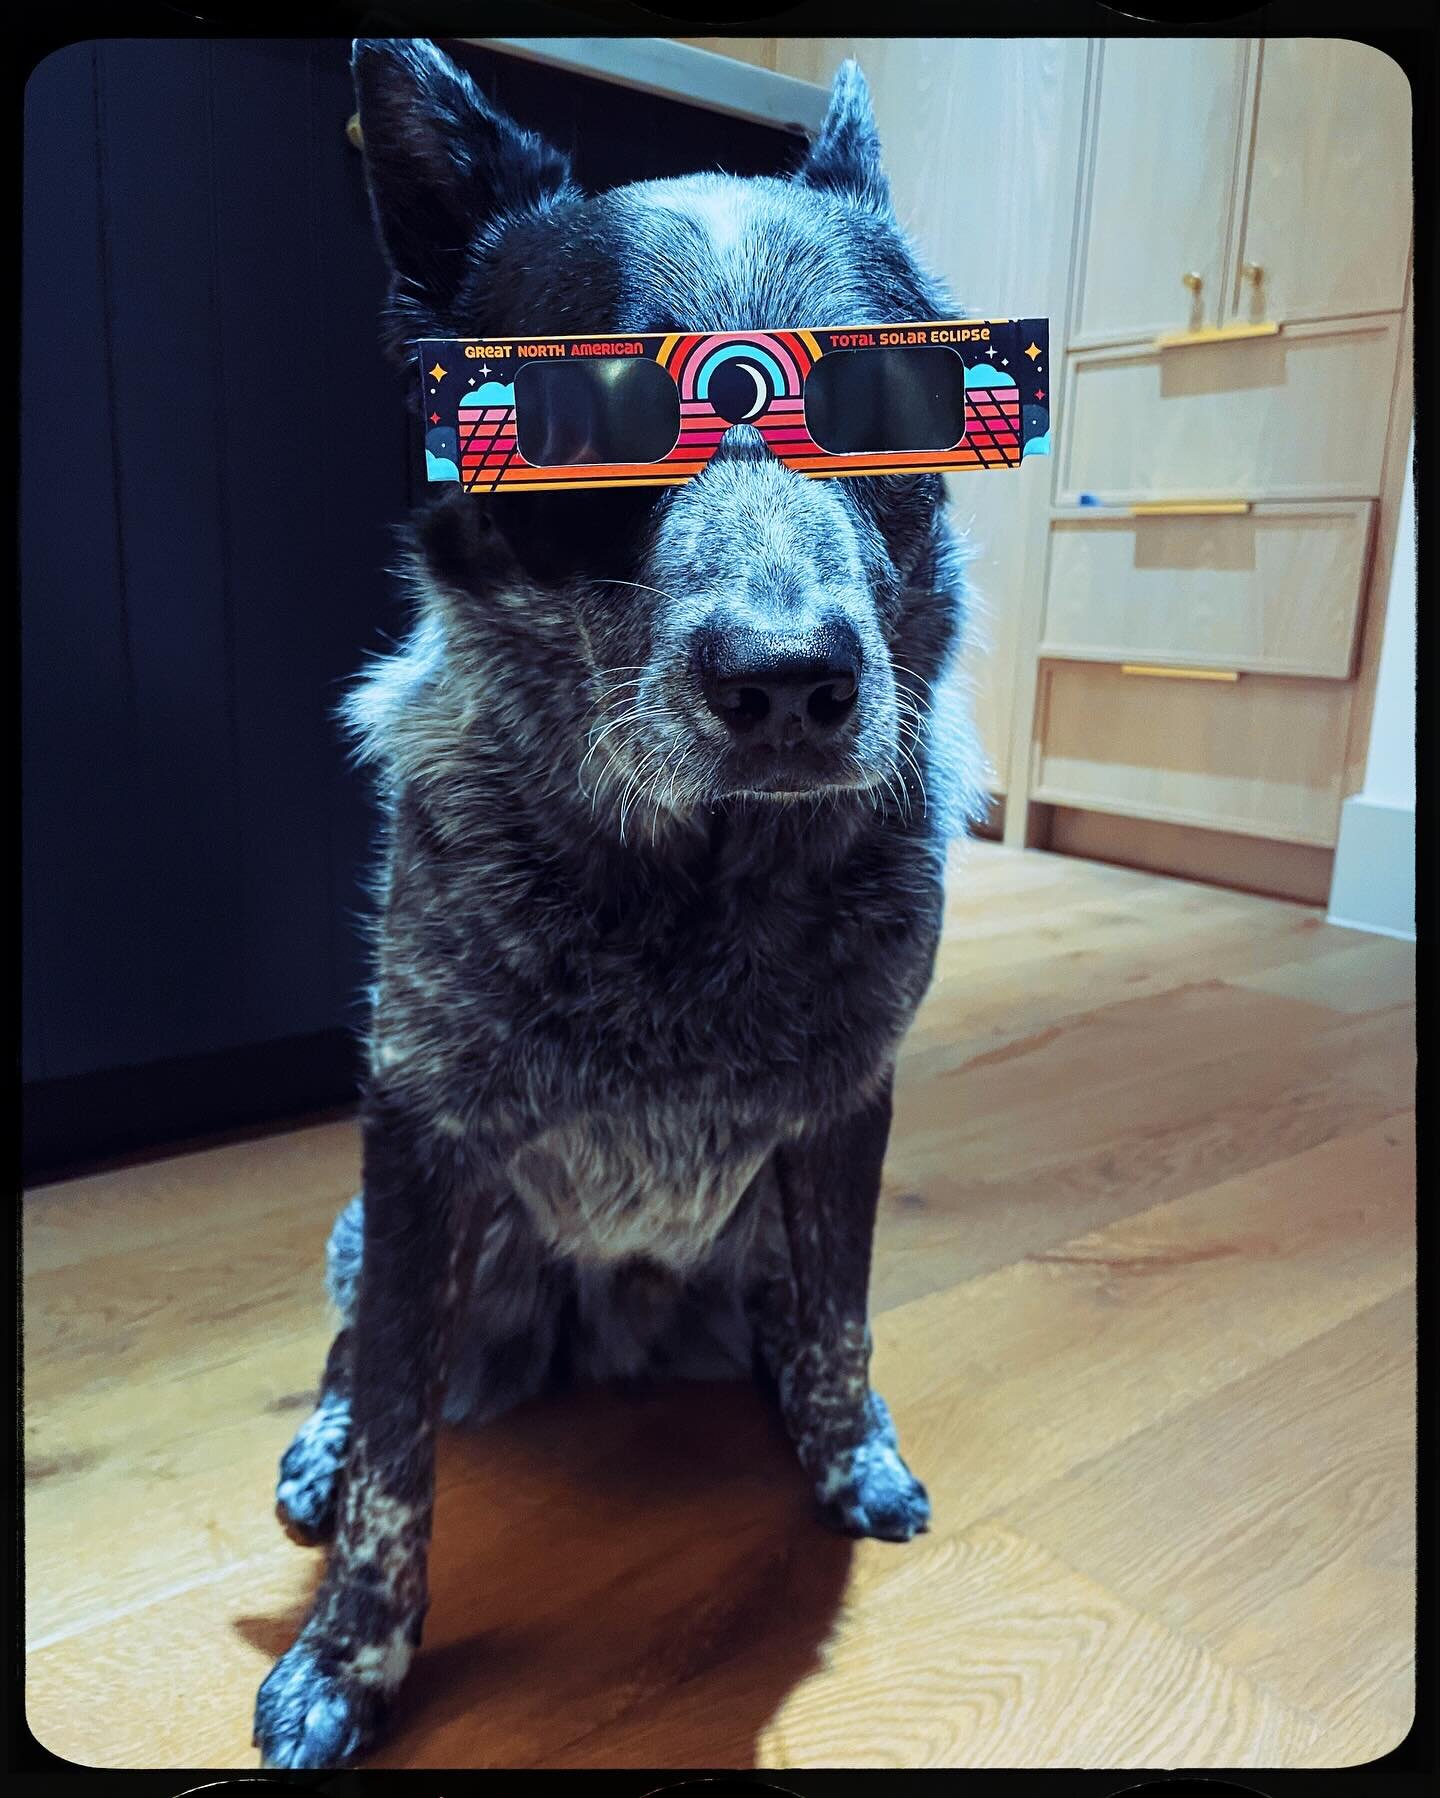 Influencer campaign begins! 😎 Sweetest boy Benji wouldn&rsquo;t get involved if he wasn&rsquo;t really excited about both the eclipse and eye safety. Shown here modeling them so handsomely (and some BTS shots with his helpful wardrobe assistant, @ad